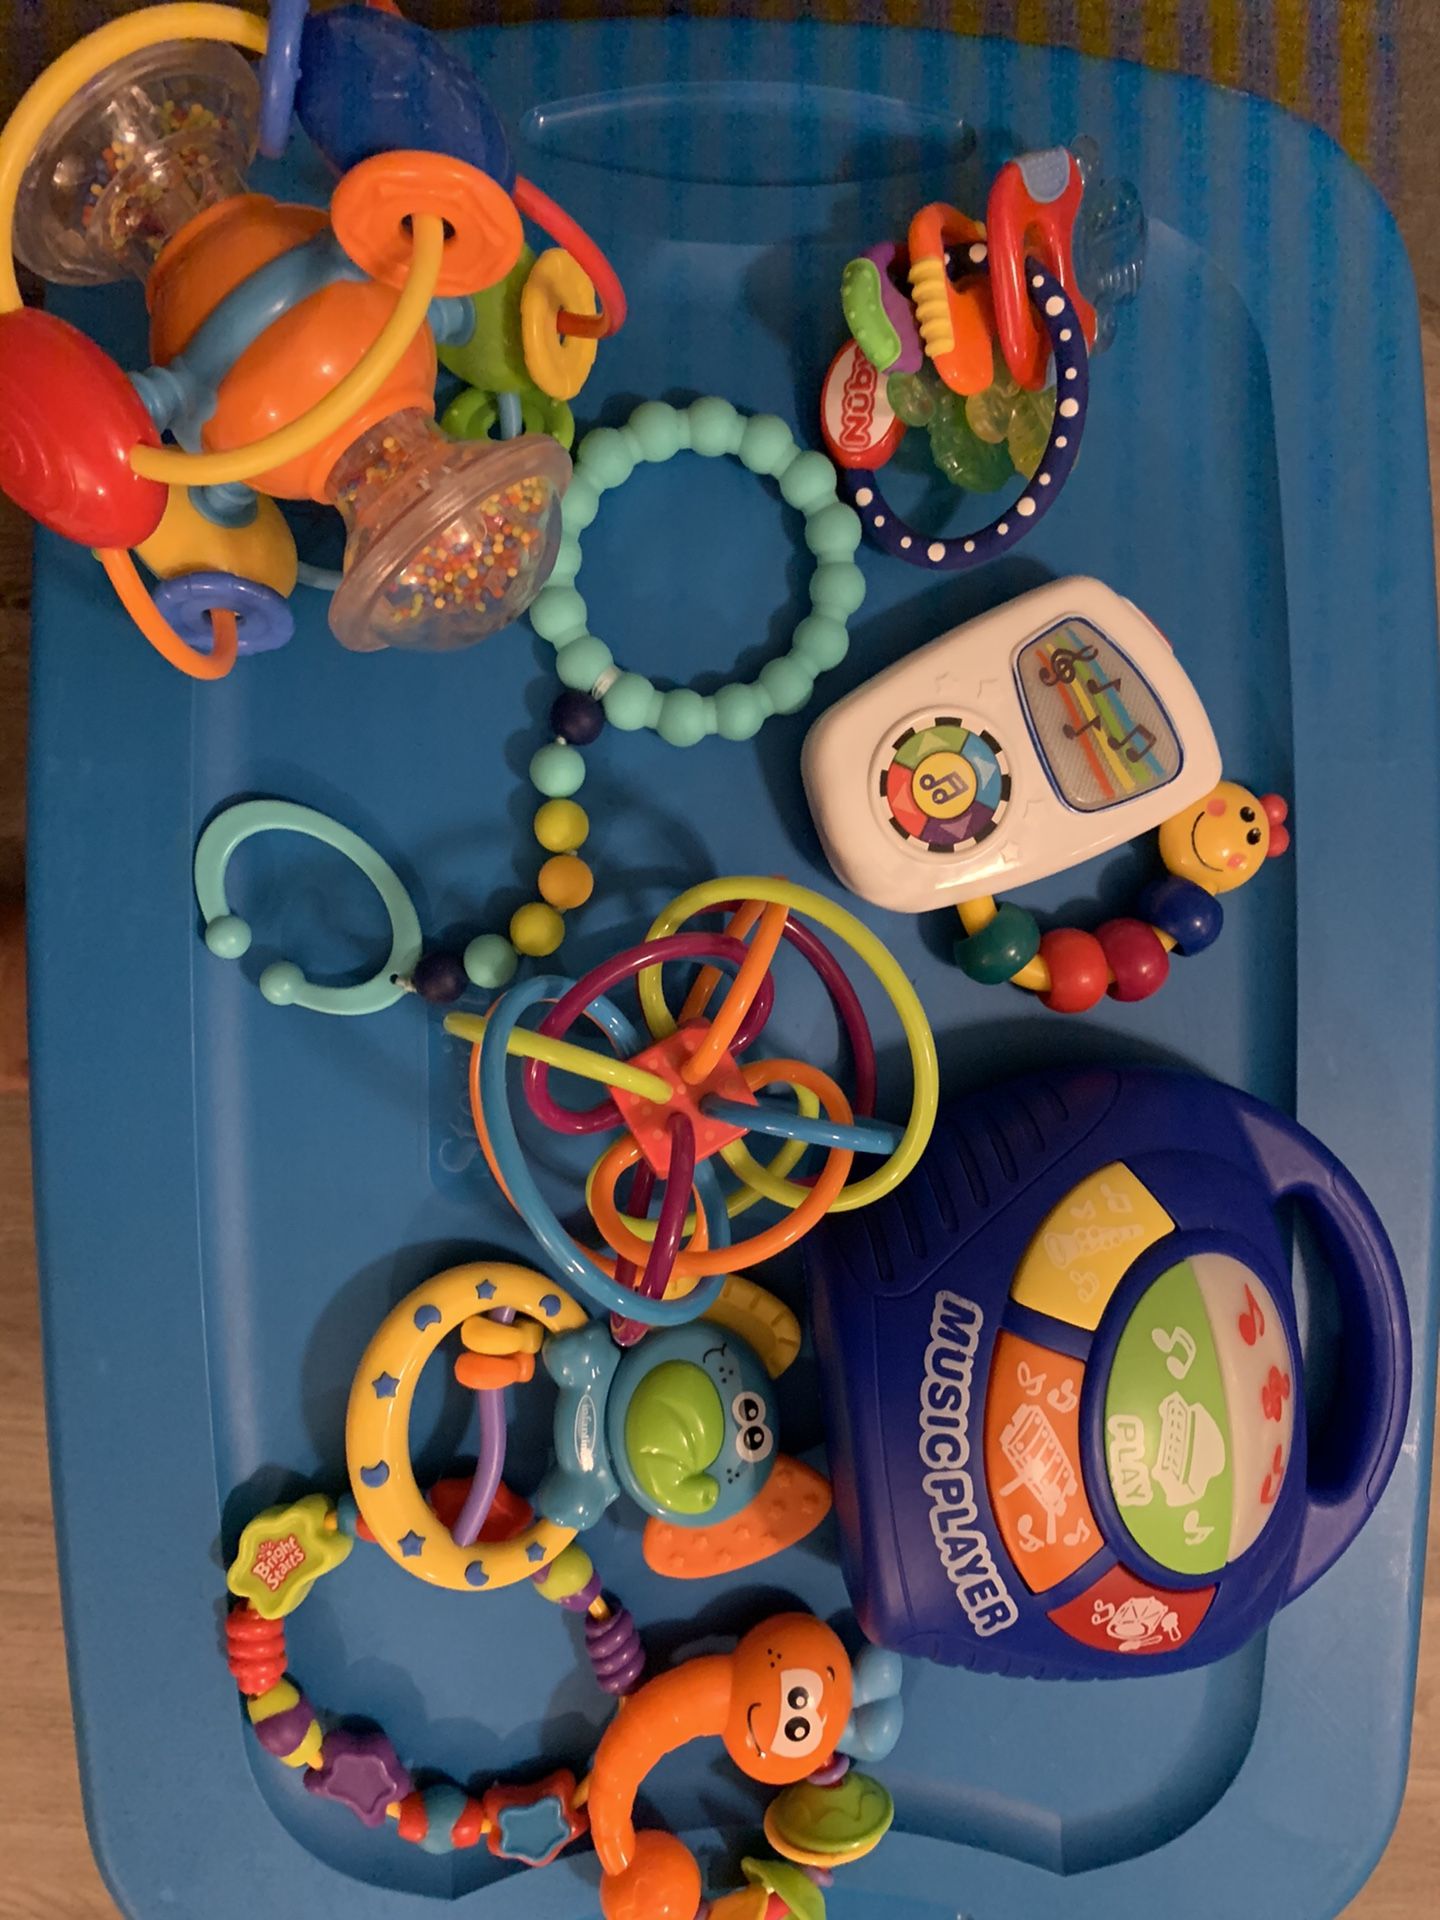 Lot of baby teething and music toys